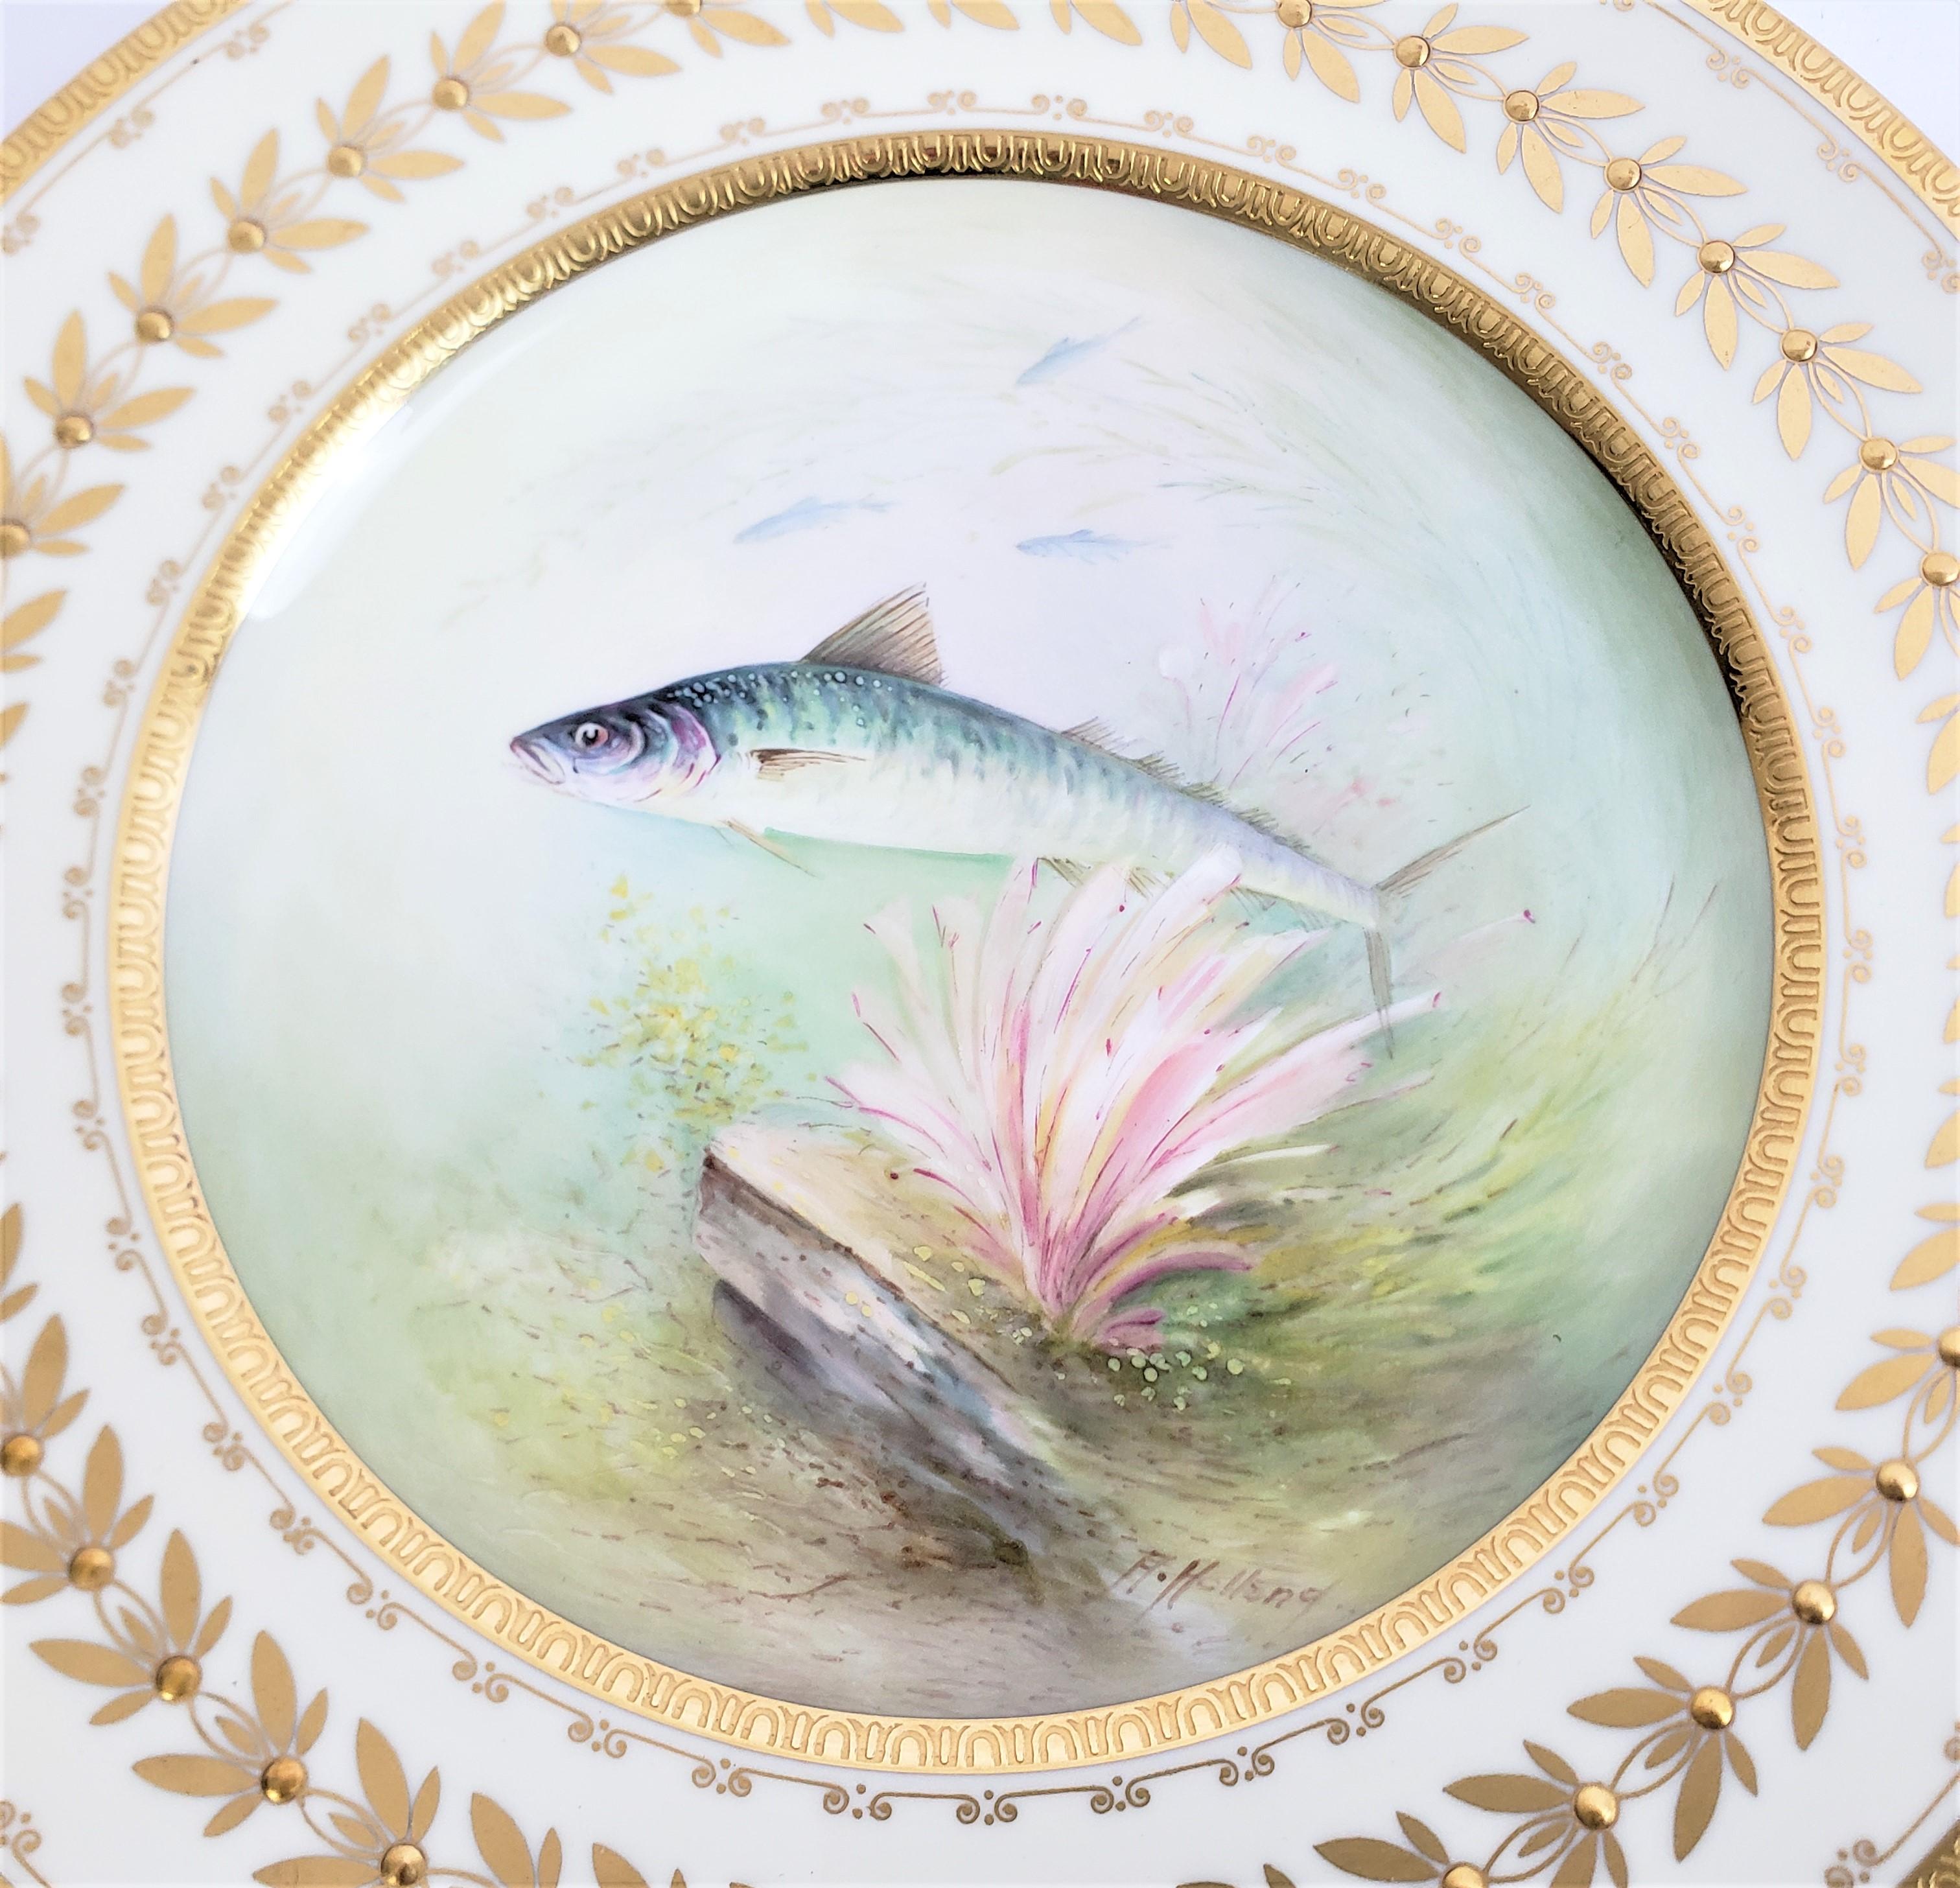 12 Antique Minton Hand-Painted Cabinet Plates Signed A. Holland Depicting Fish For Sale 5